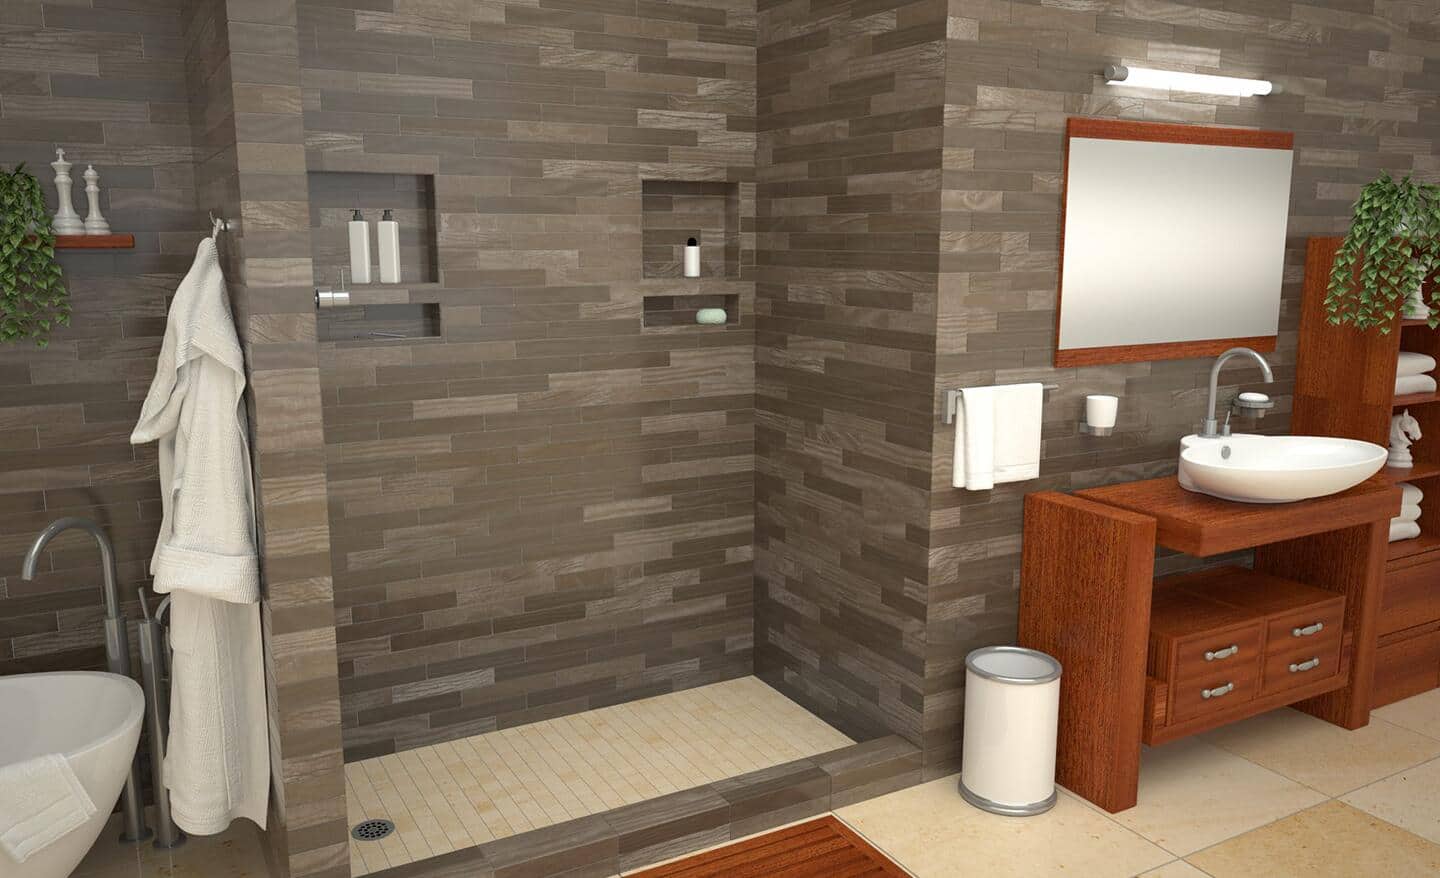 Wood-look tiles installed horizontally in a large shower.